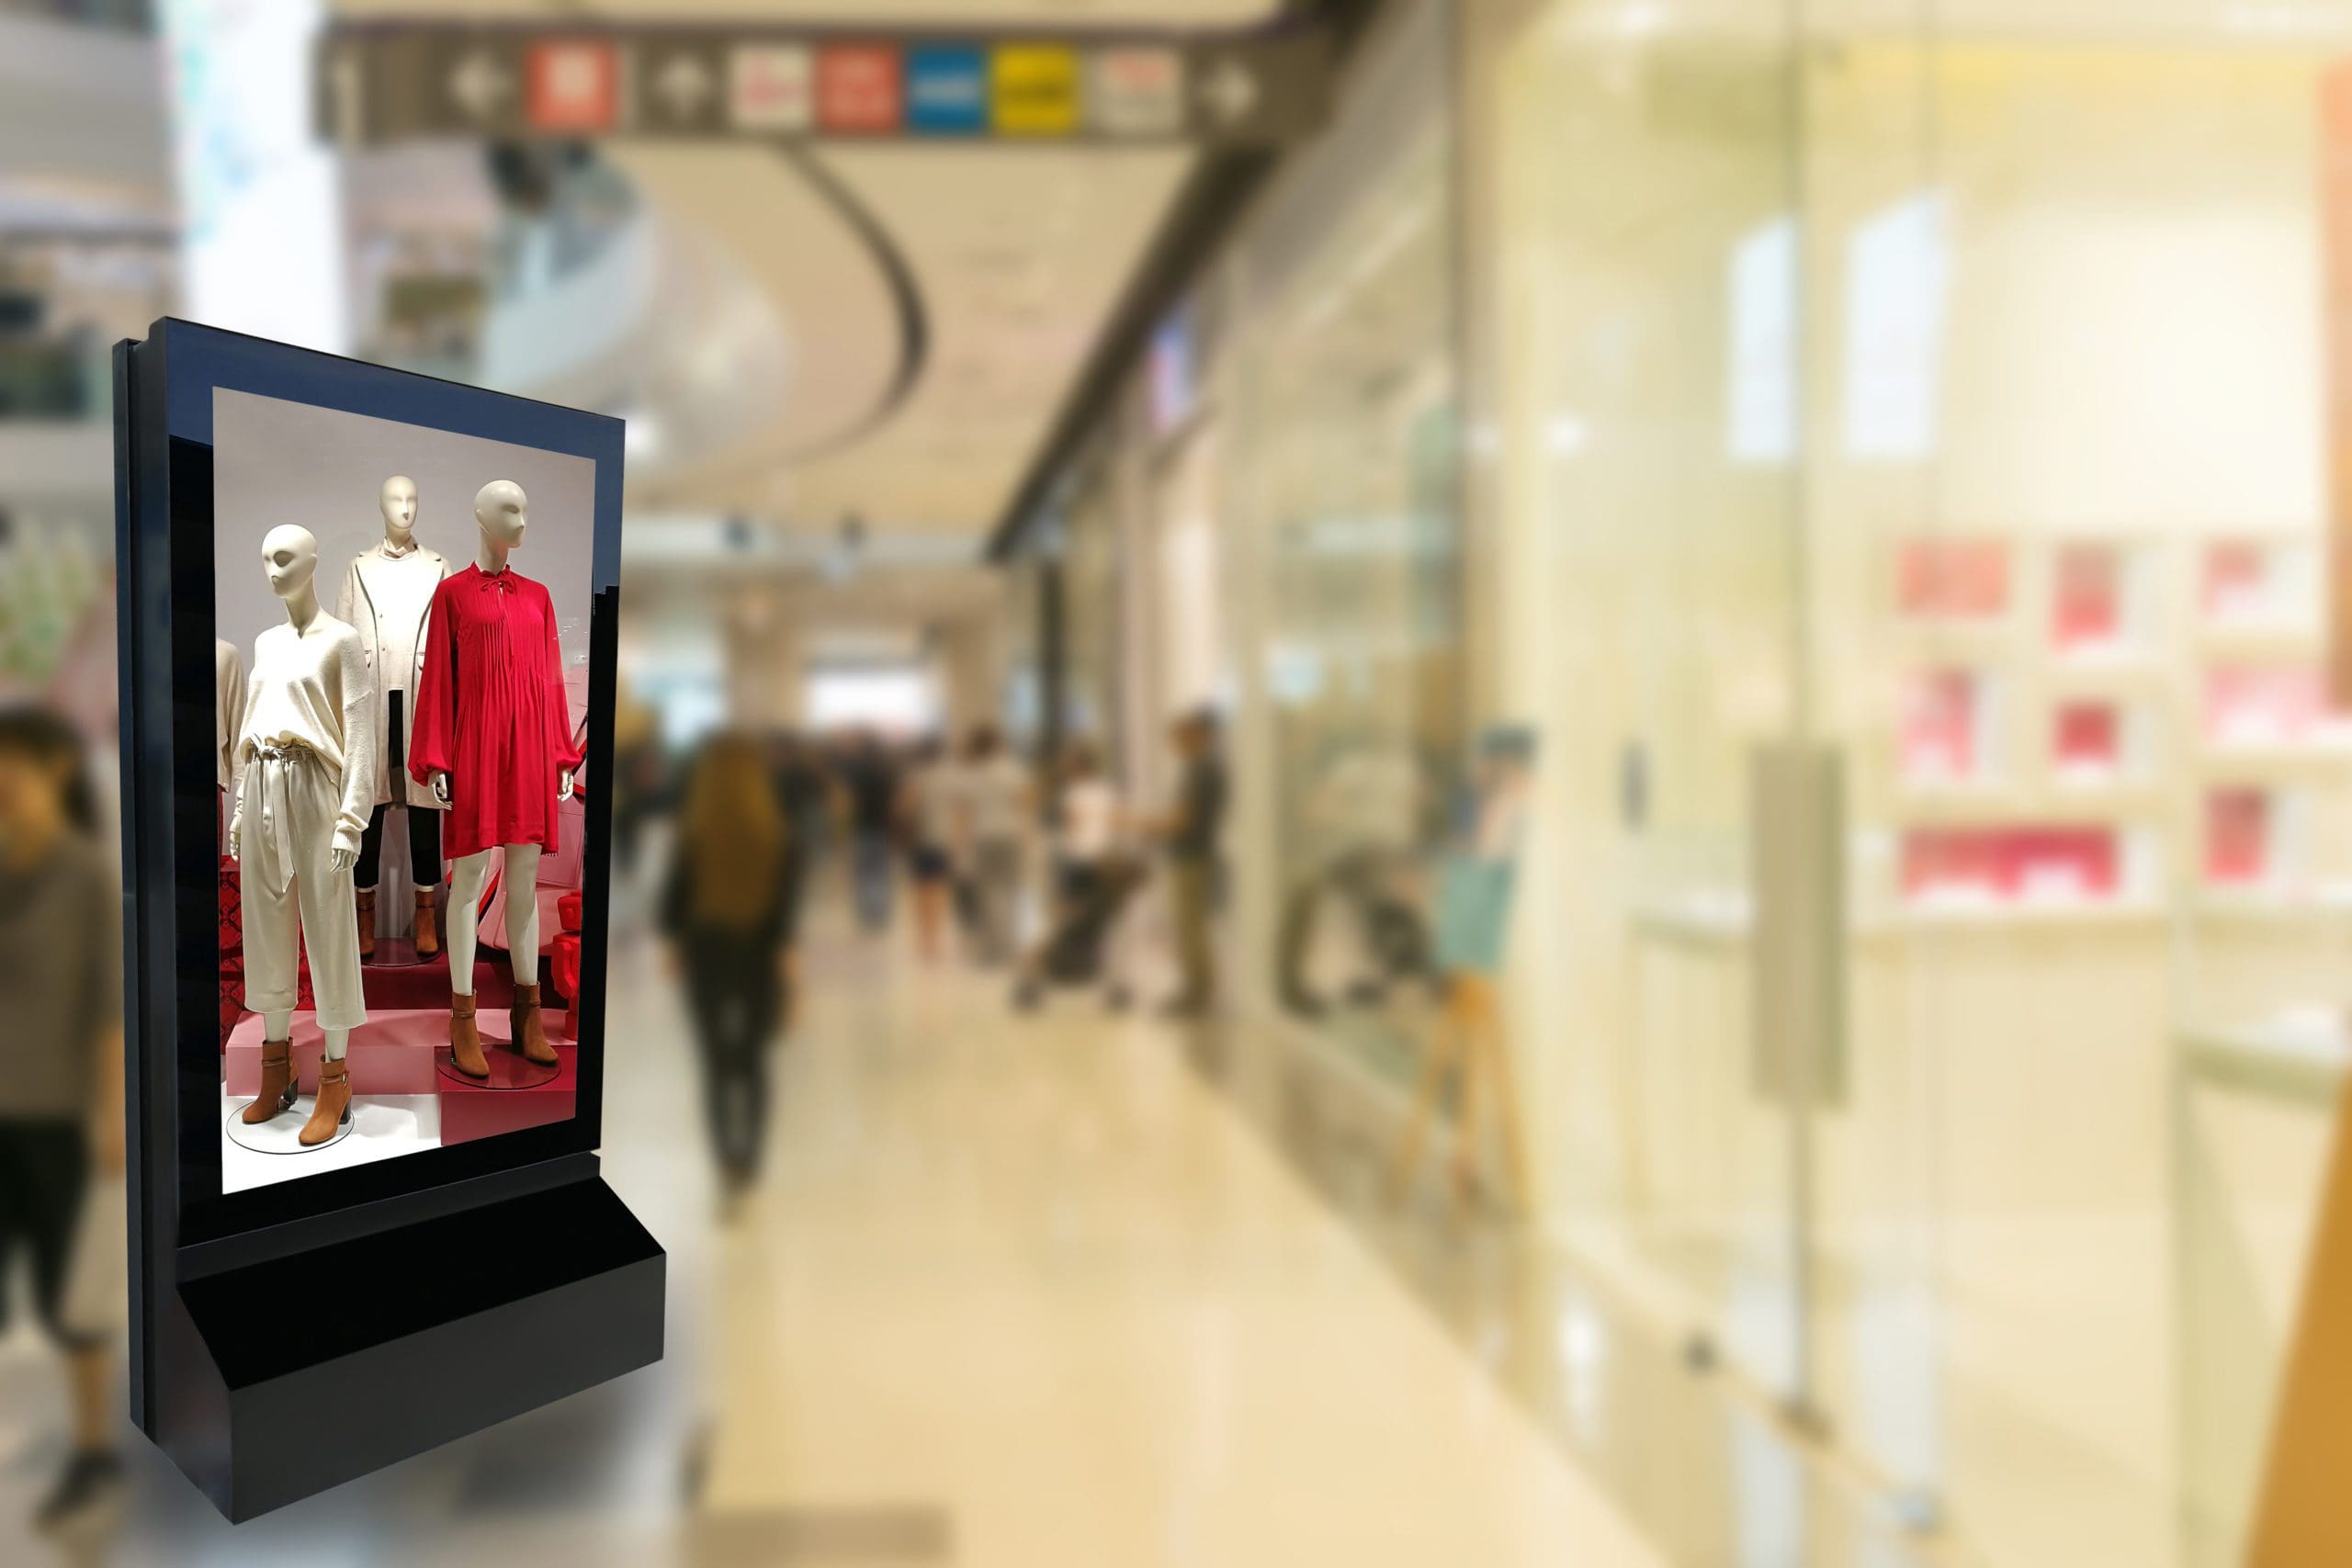 Marketing and advertisement concept digital signage billboard clothes fashion lifestyle for your text message or media content in department store shopping mall